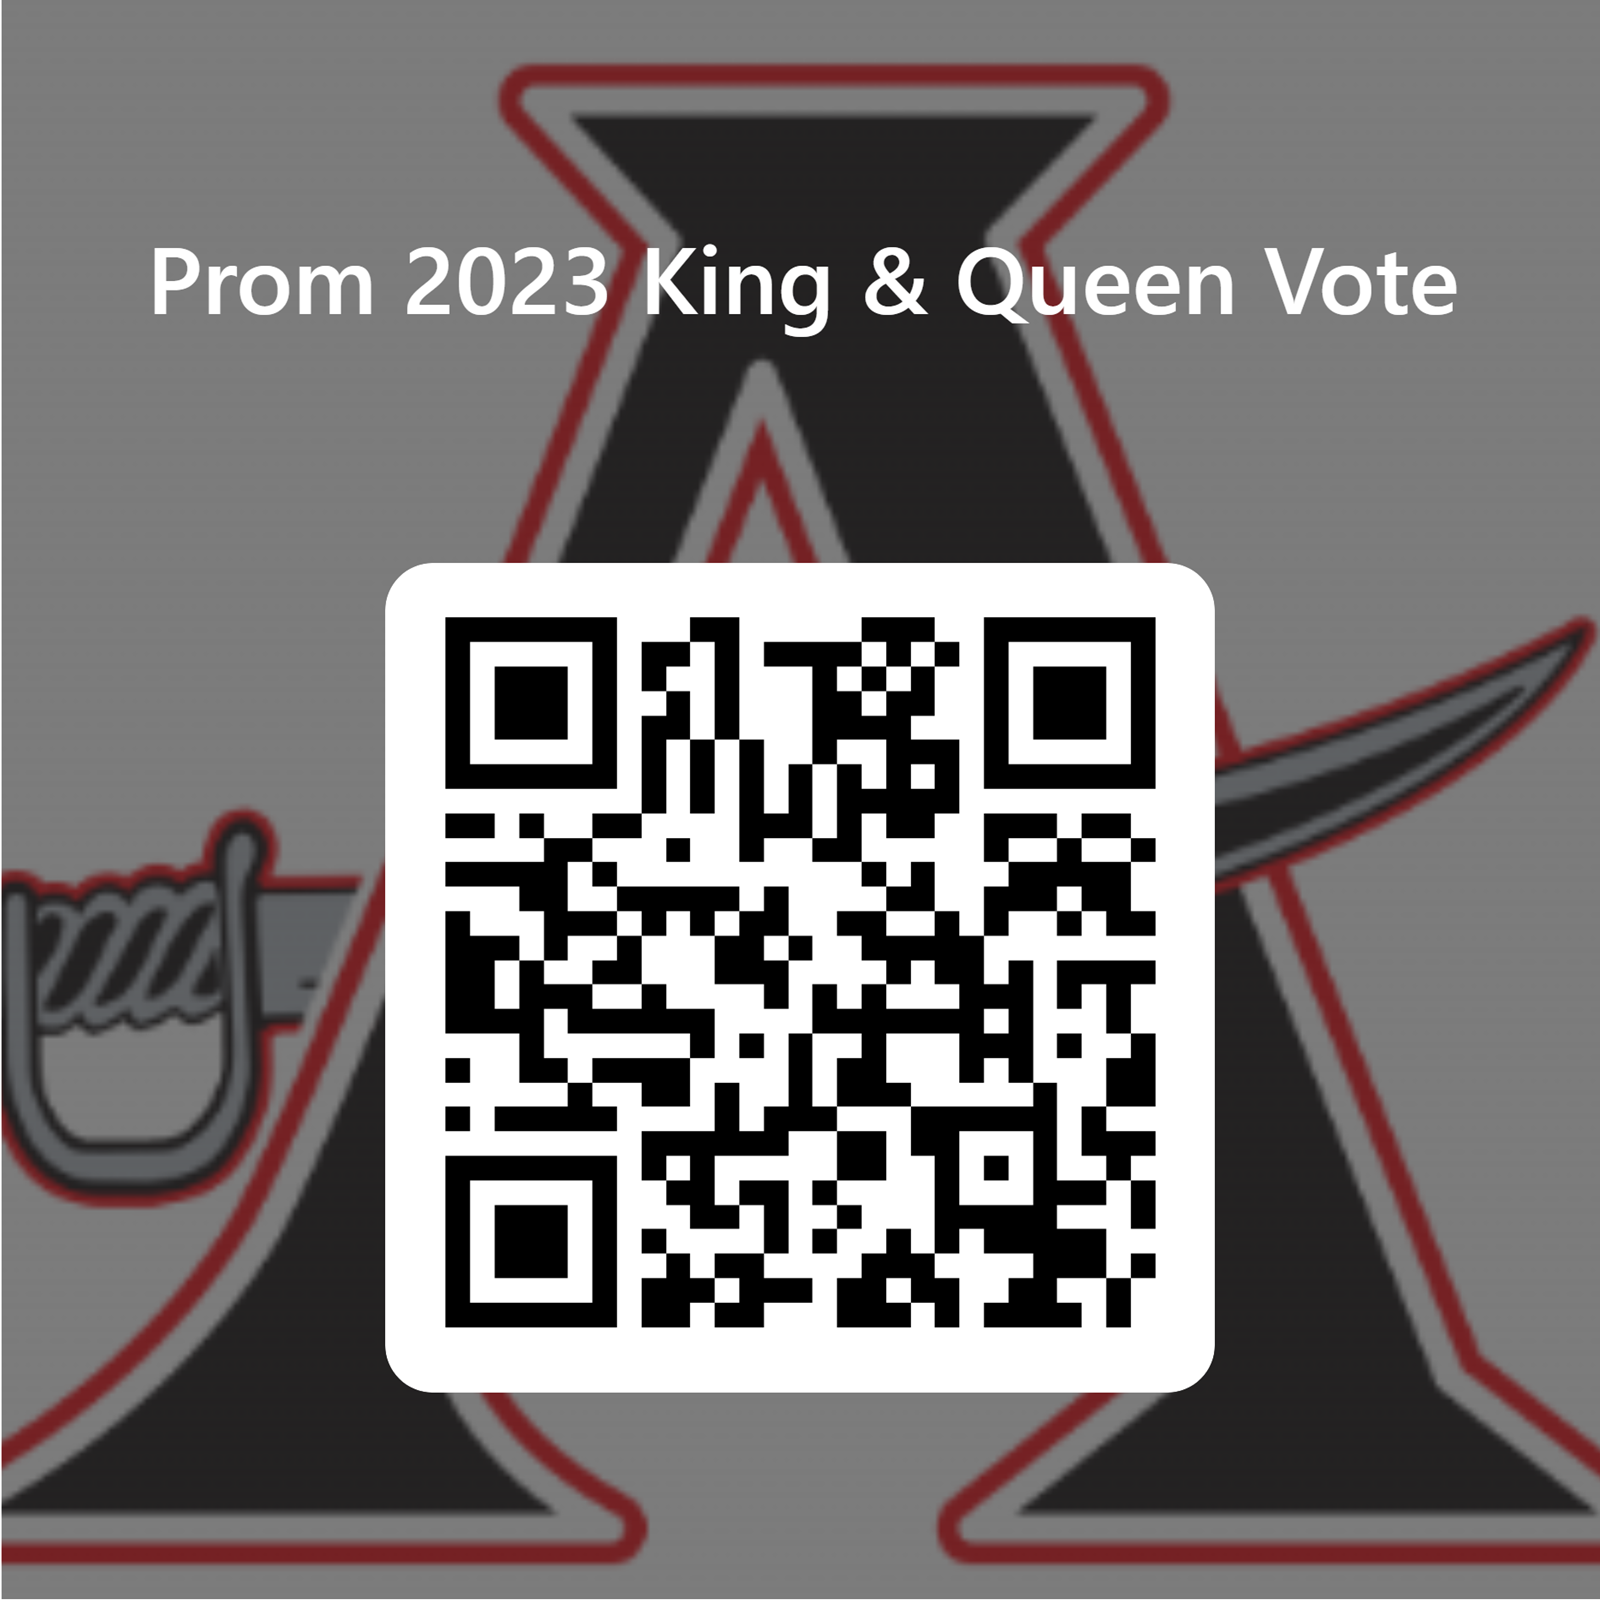 QRCode%20for%20Prom%202023%20King%20%20Queen%20Vote.png